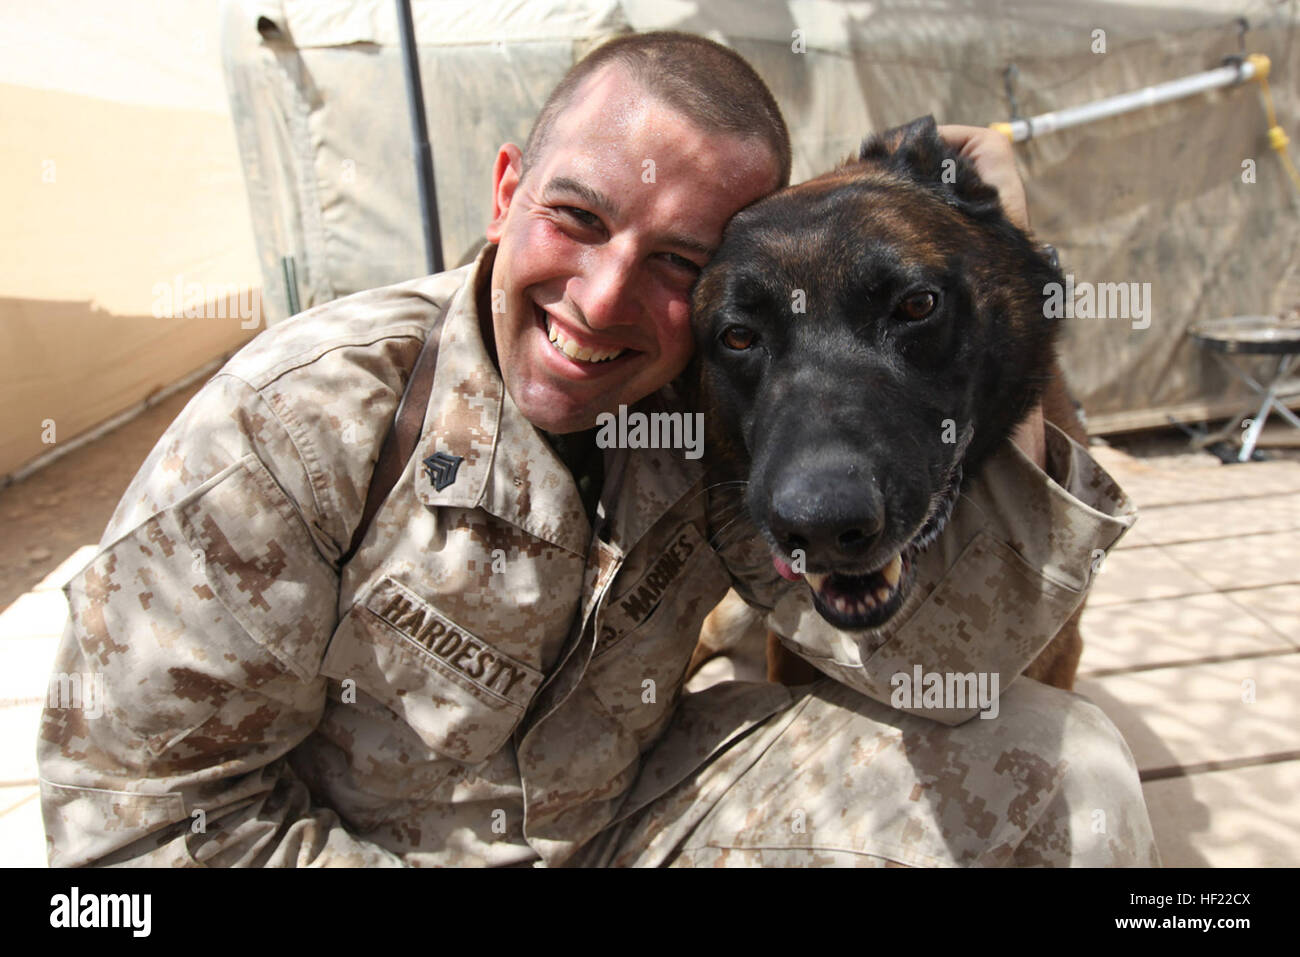 Sgt. Charles D. Hardesty, combat tracker dog handler, Military Police, I Marine Headquarters Group, I Marine Expeditionary Force (FWD), bonds with his dog, Robbie or also known as 'bear dog,' at Camp Leatherneck, Afghanistan. 'Robbie loves attention,' says Hardesty, 'He is a nutcase.' Hardesty and Robbie have been together for two years and both have a constant flow of energy. Hardesty,  from Smoot, Wyo., says his favorite memory with Robbie was while assigned to a compound in Helmand province.  Both, handler and his dog, huddled together in a corner to keep warm. Candid canine DVIDS279636 Stock Photo